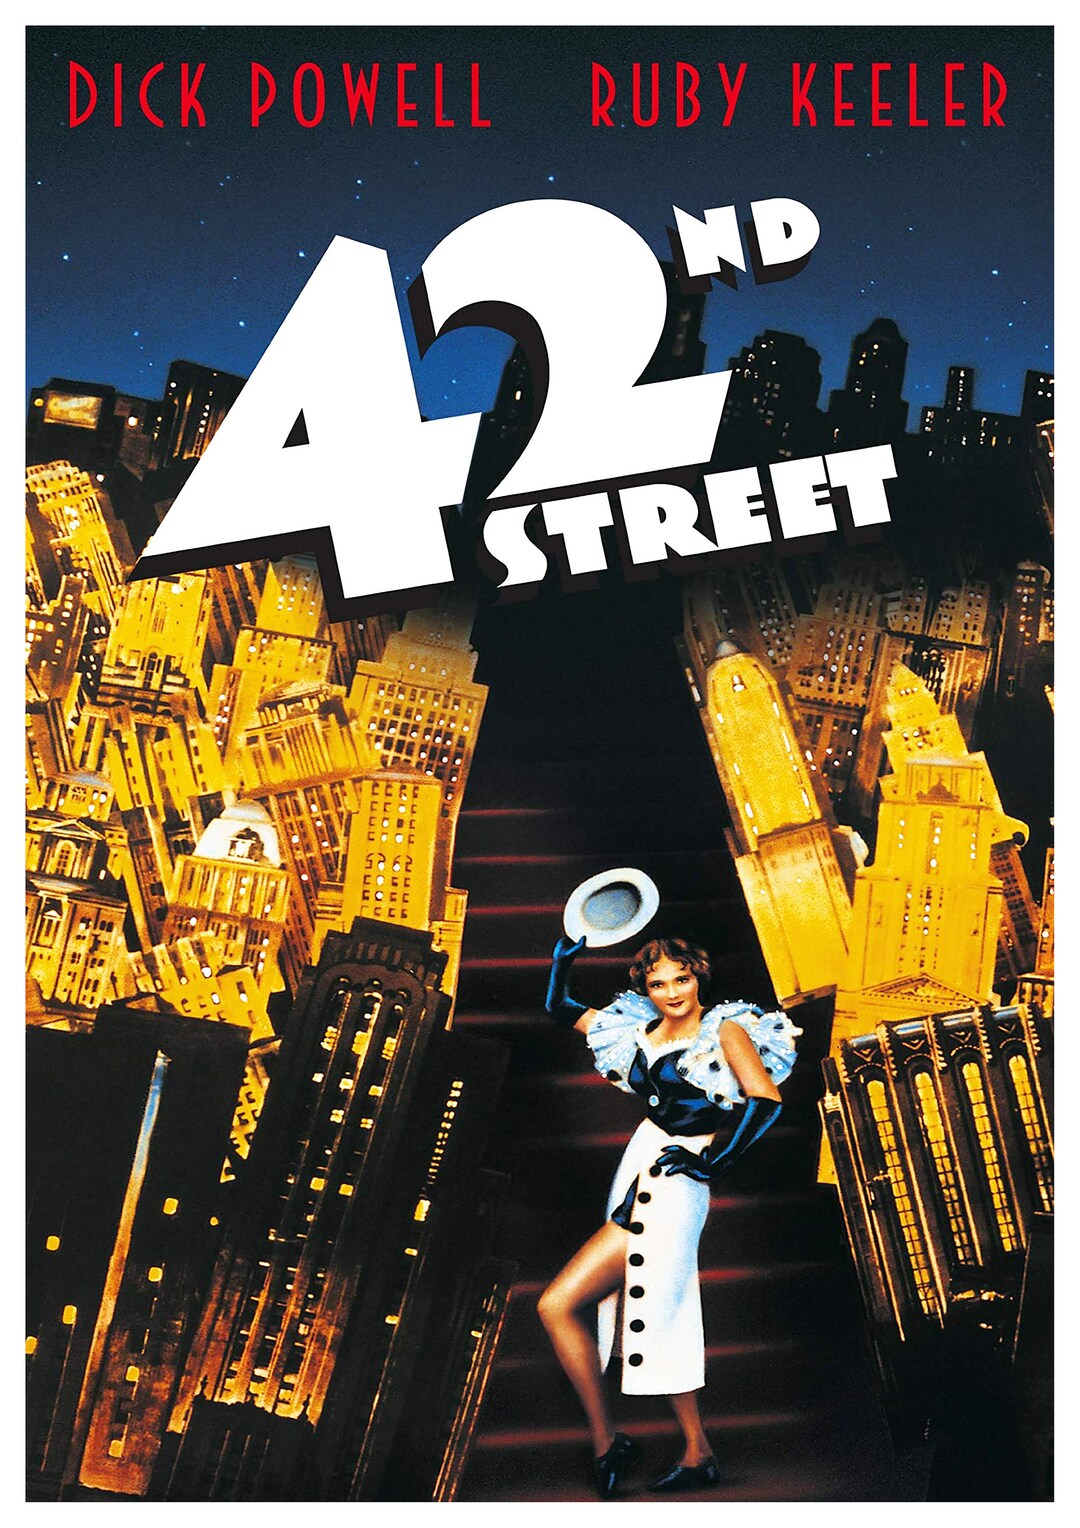 Street, Poster, 42nd Musical Wall Available Etsy Art, Reproduction Home Various Vintage Sizes -